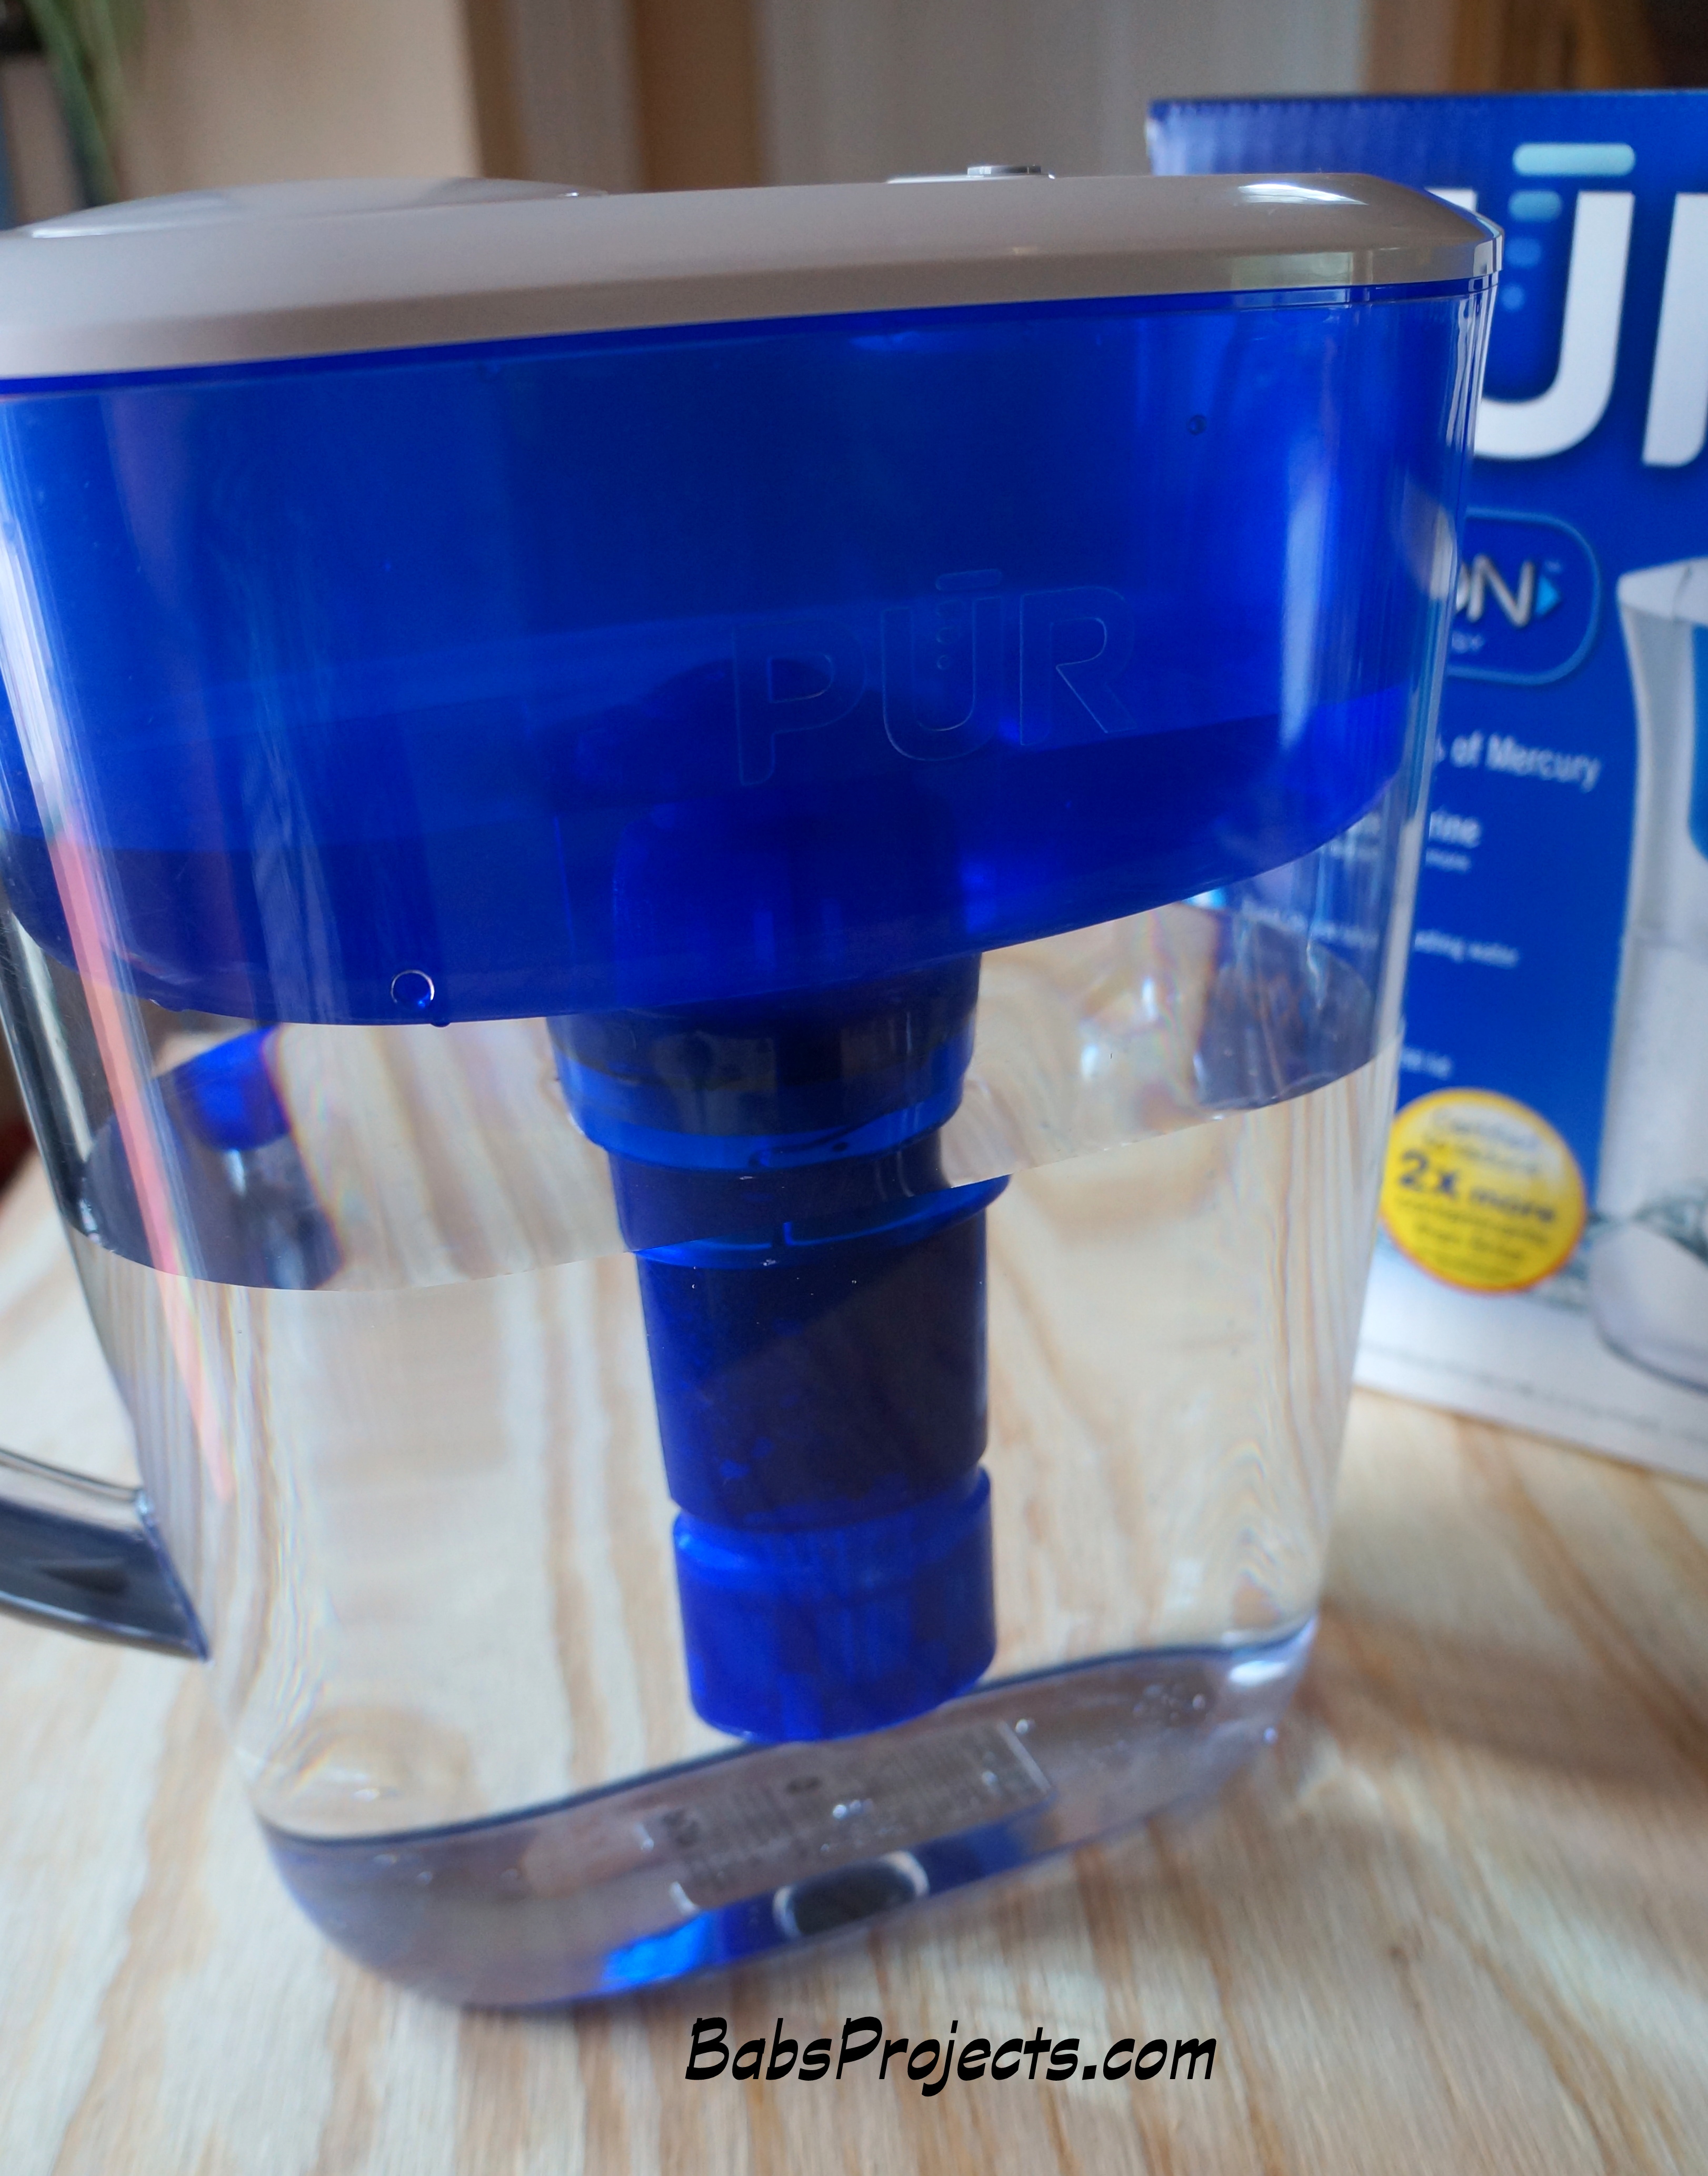 How to clean a pur water filter